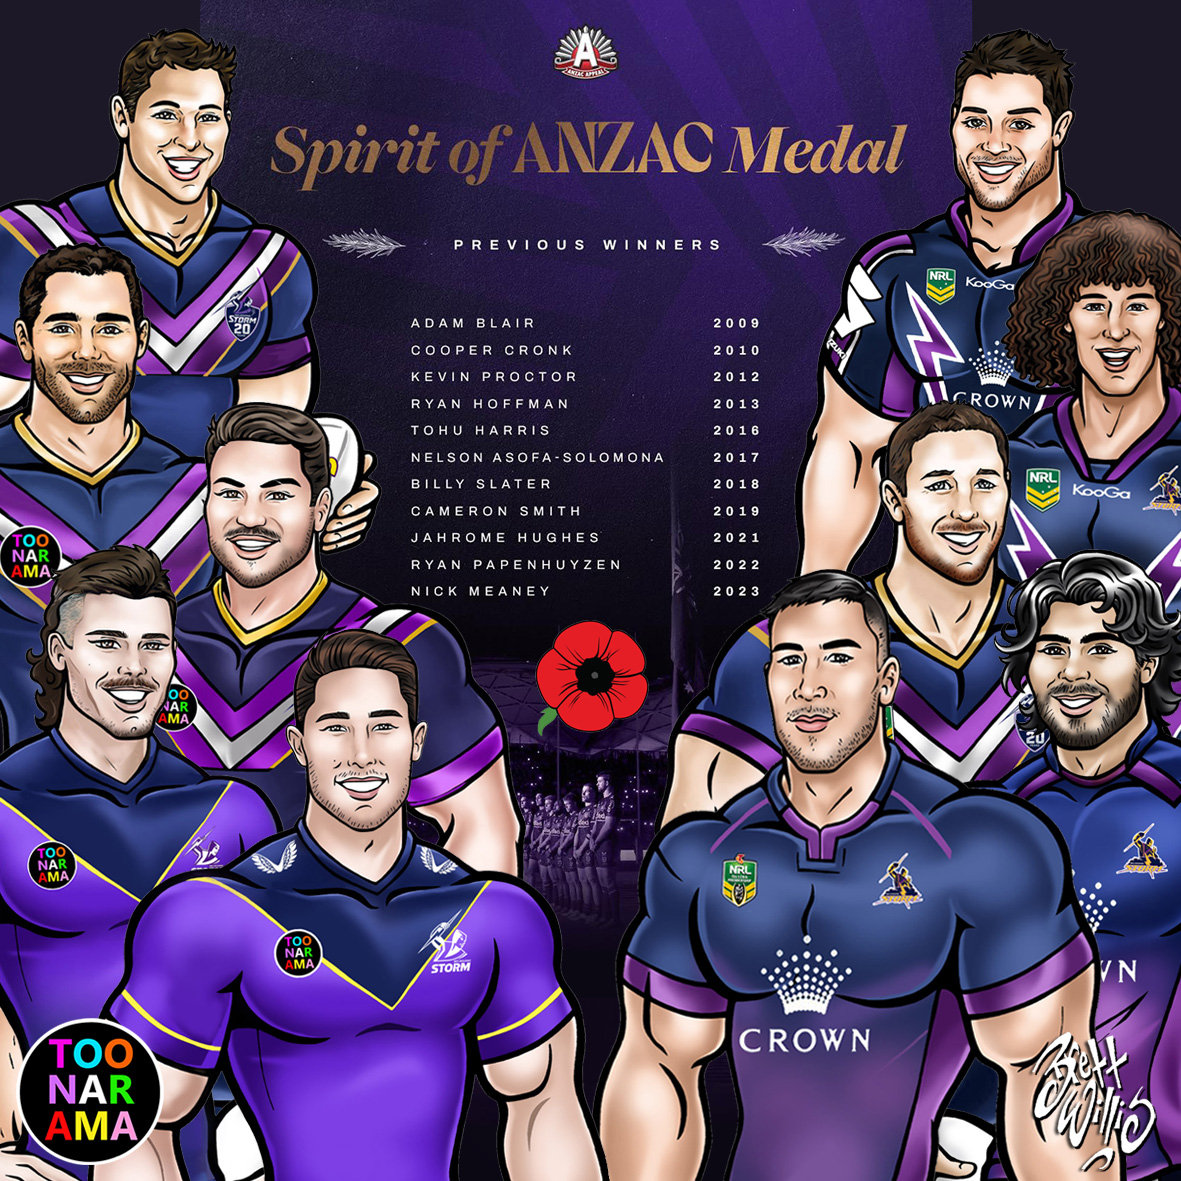 Melbourne STORM v South Sydney Rabbitohs - ANZAC Day Match 2024 - Spirit of ANZAC Medal previous winners! TOON-ight - a new name is added to the honour roll! Who is it going to be? #GoStorm #toonarama #LestWeForget